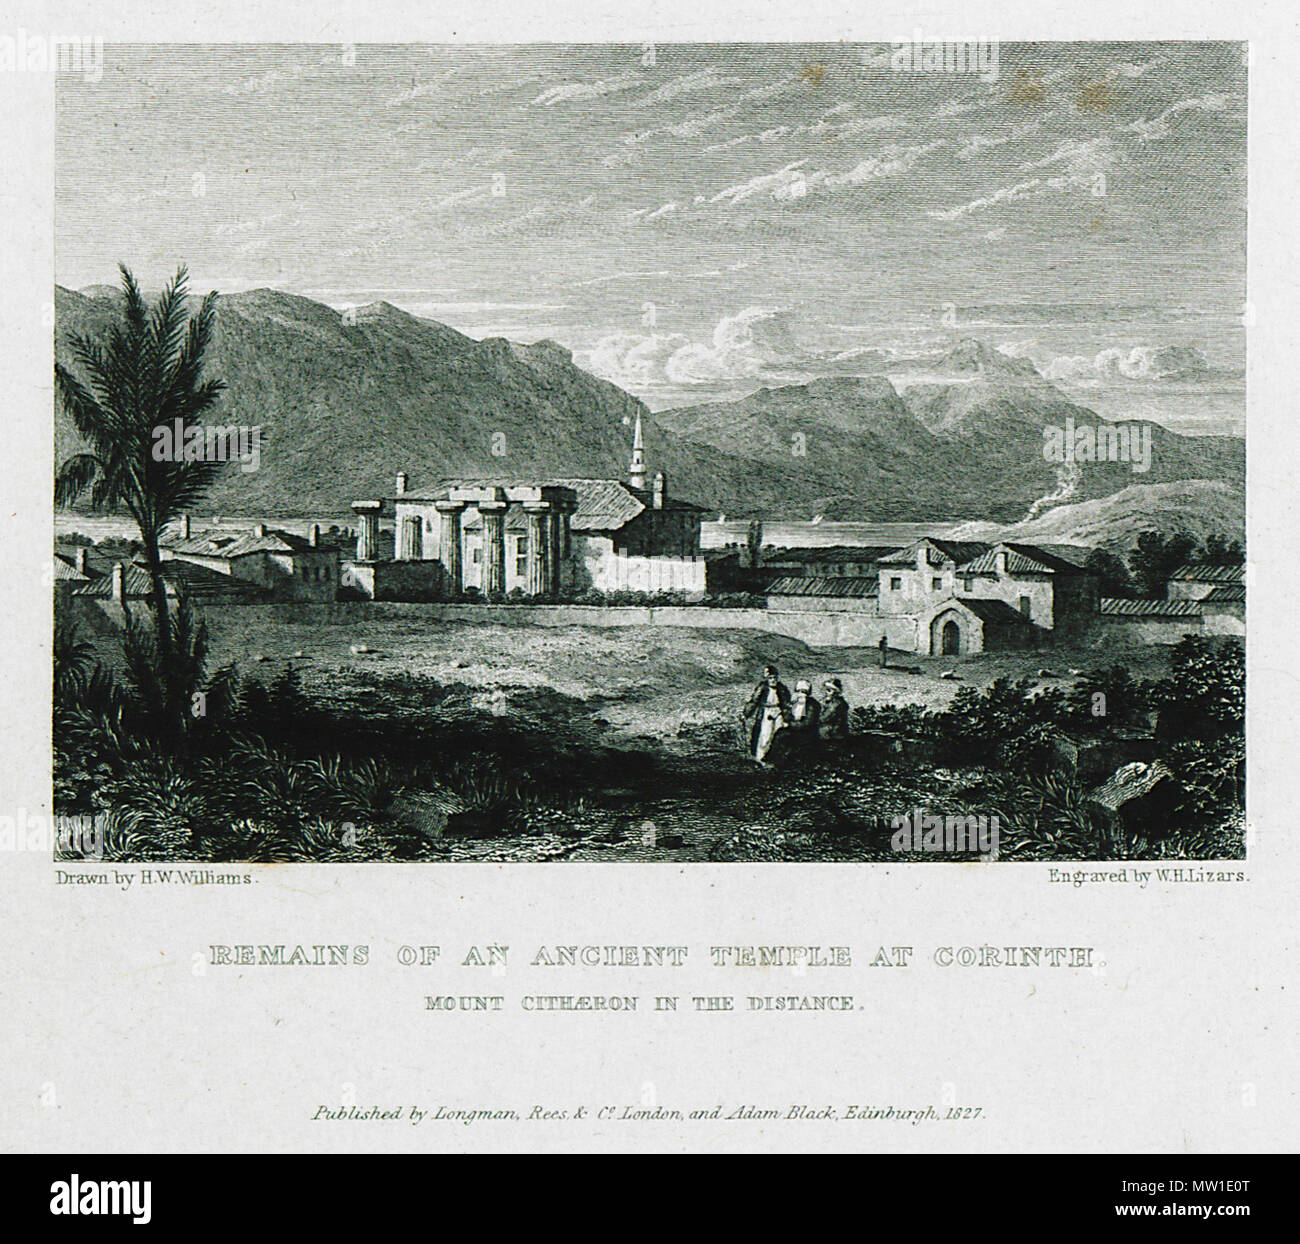 . English: Hugh William Williams. Select Views in Greece with Classical Illustrations, vol. ΙI, London, Longman, Rees, Orme, Brown, and Green / Edinburgh, Adam Black, M.DCCC.XXIX (1829) . 1829. William Hugh Williams 516 Remains of an ancient temple at Corinth Mount Cithaeron in the distance - Williams Hugh William - 1829 Stock Photo